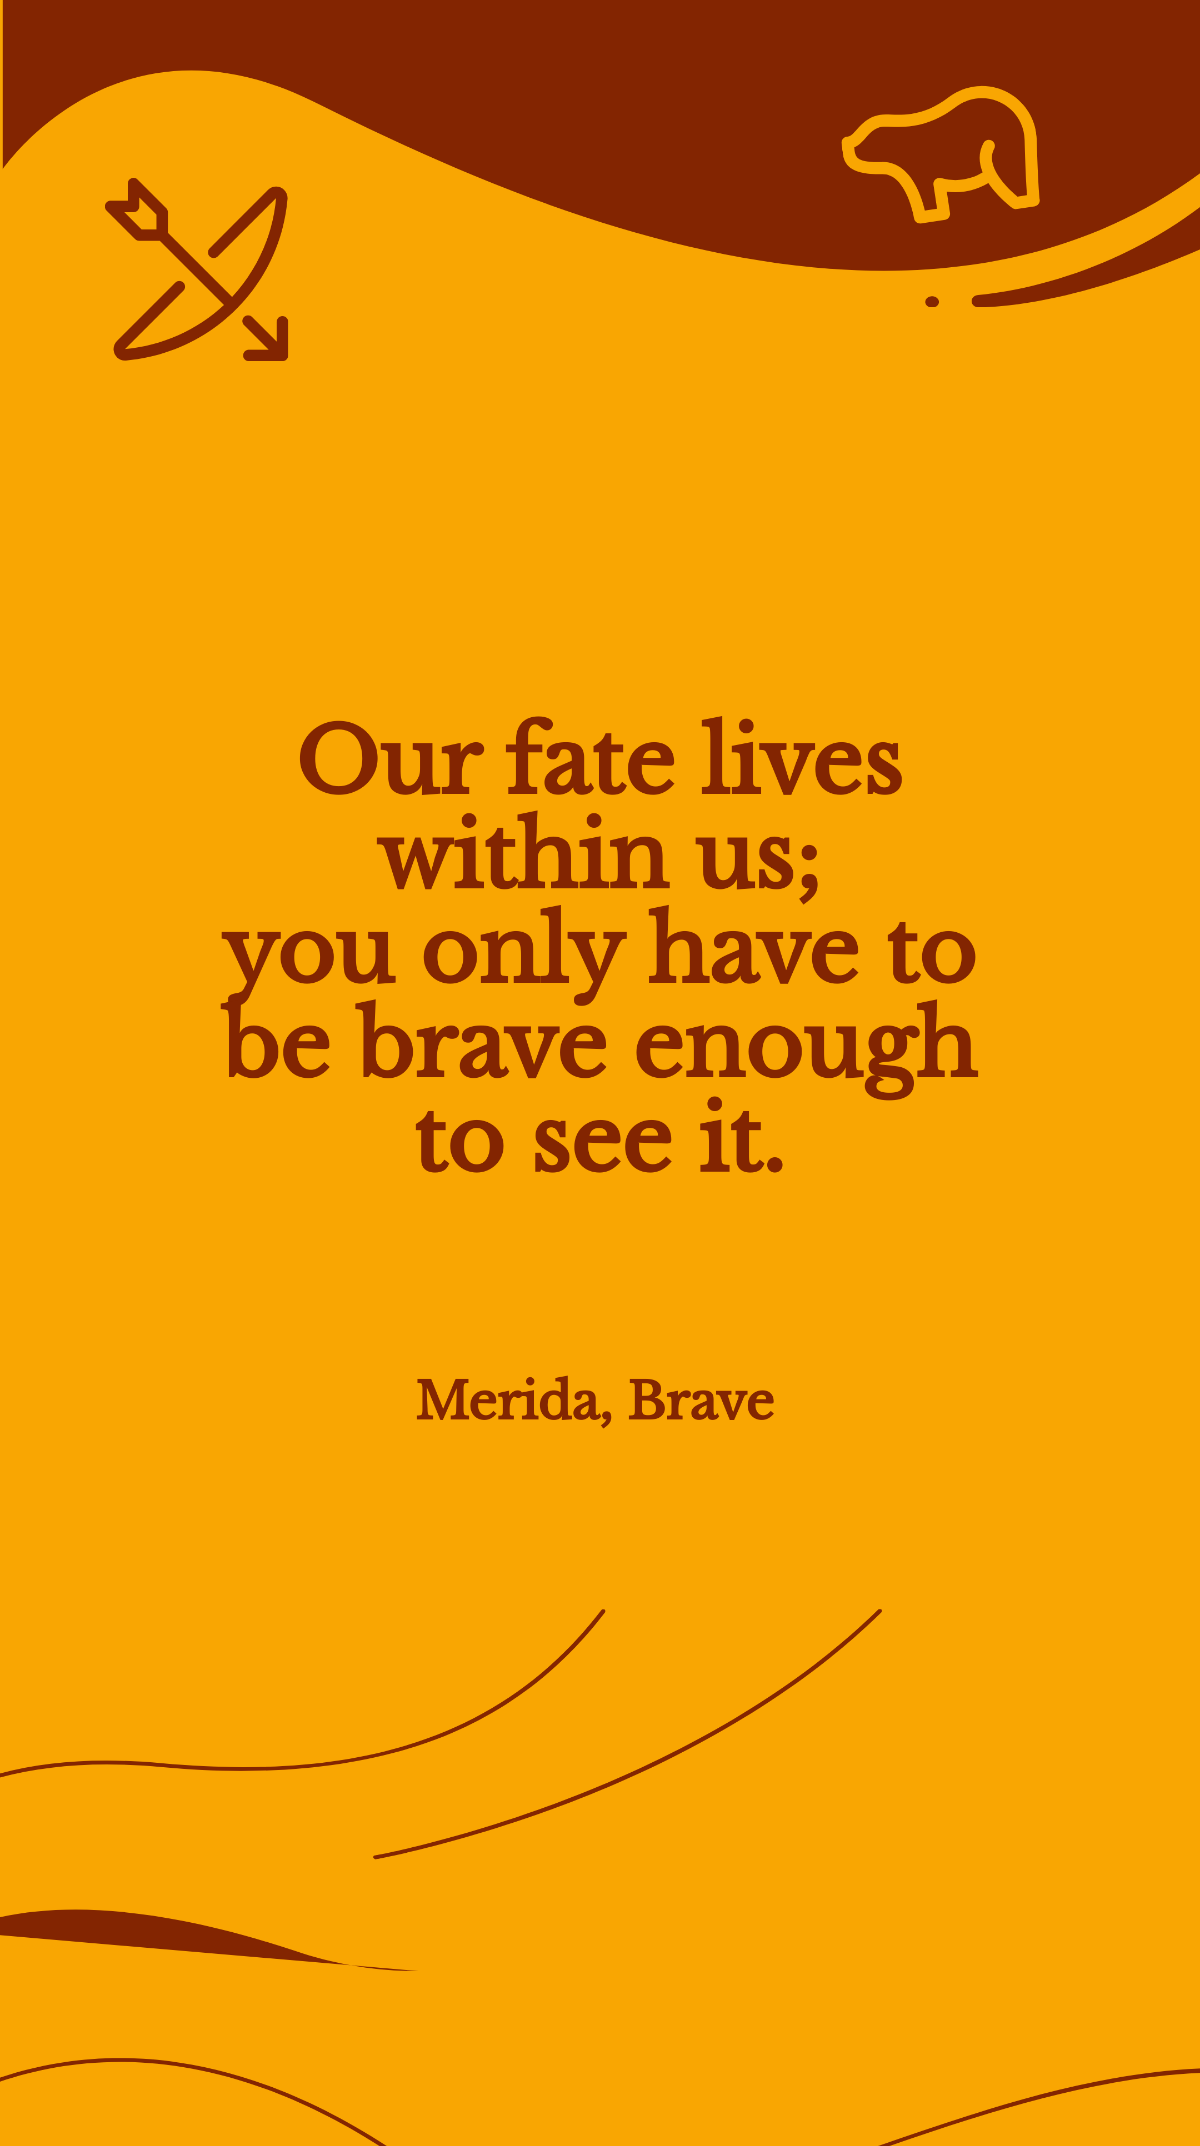 Merida, Brave - “Our fate lives within us; you only have to be brave enough to see it.” Template